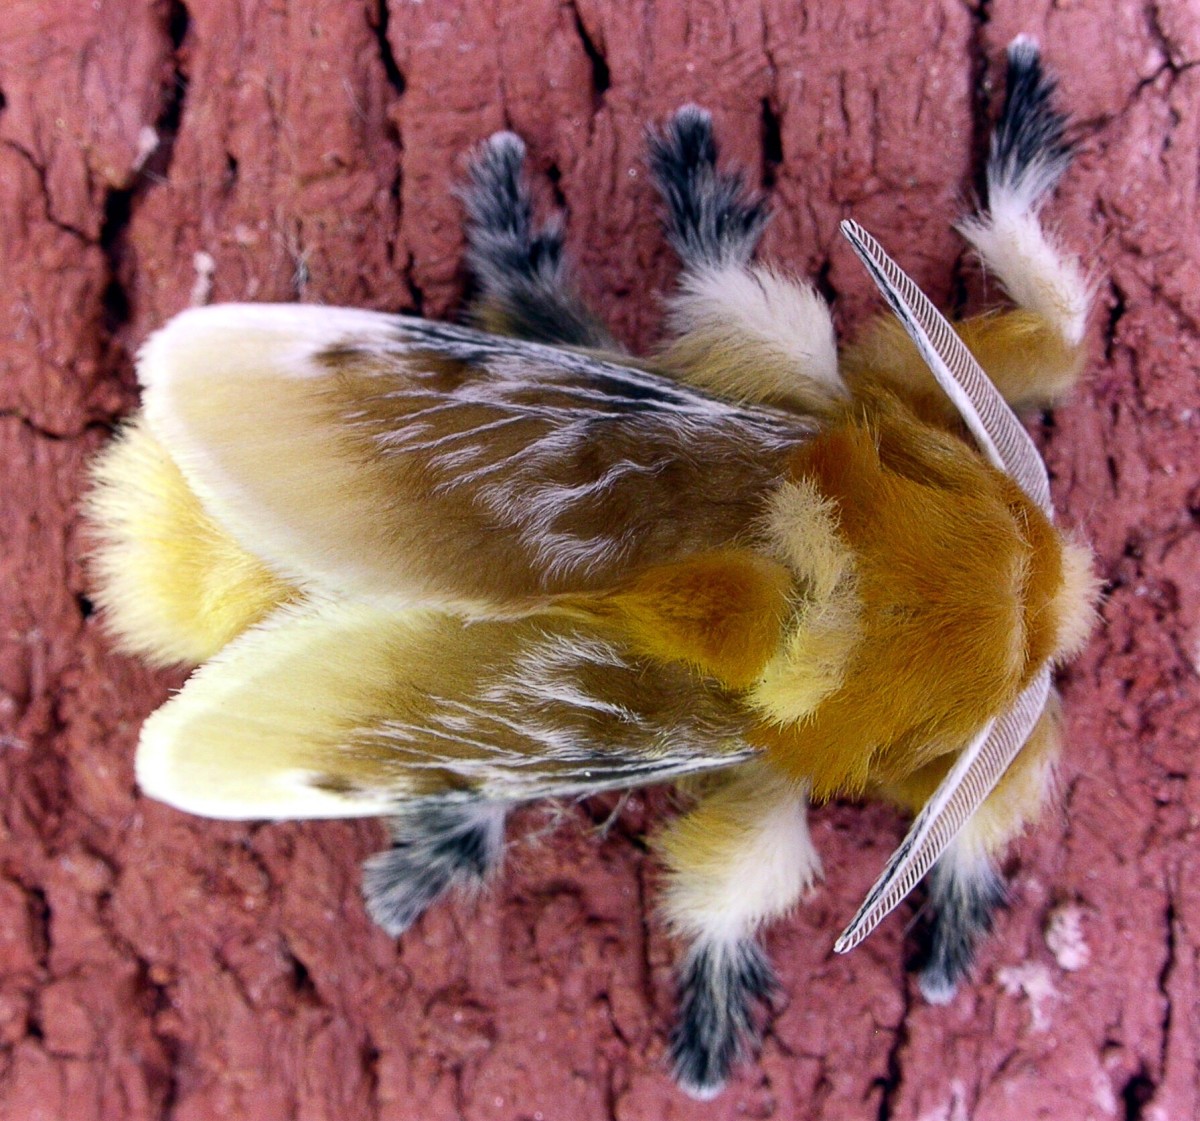 A southern flannel moth